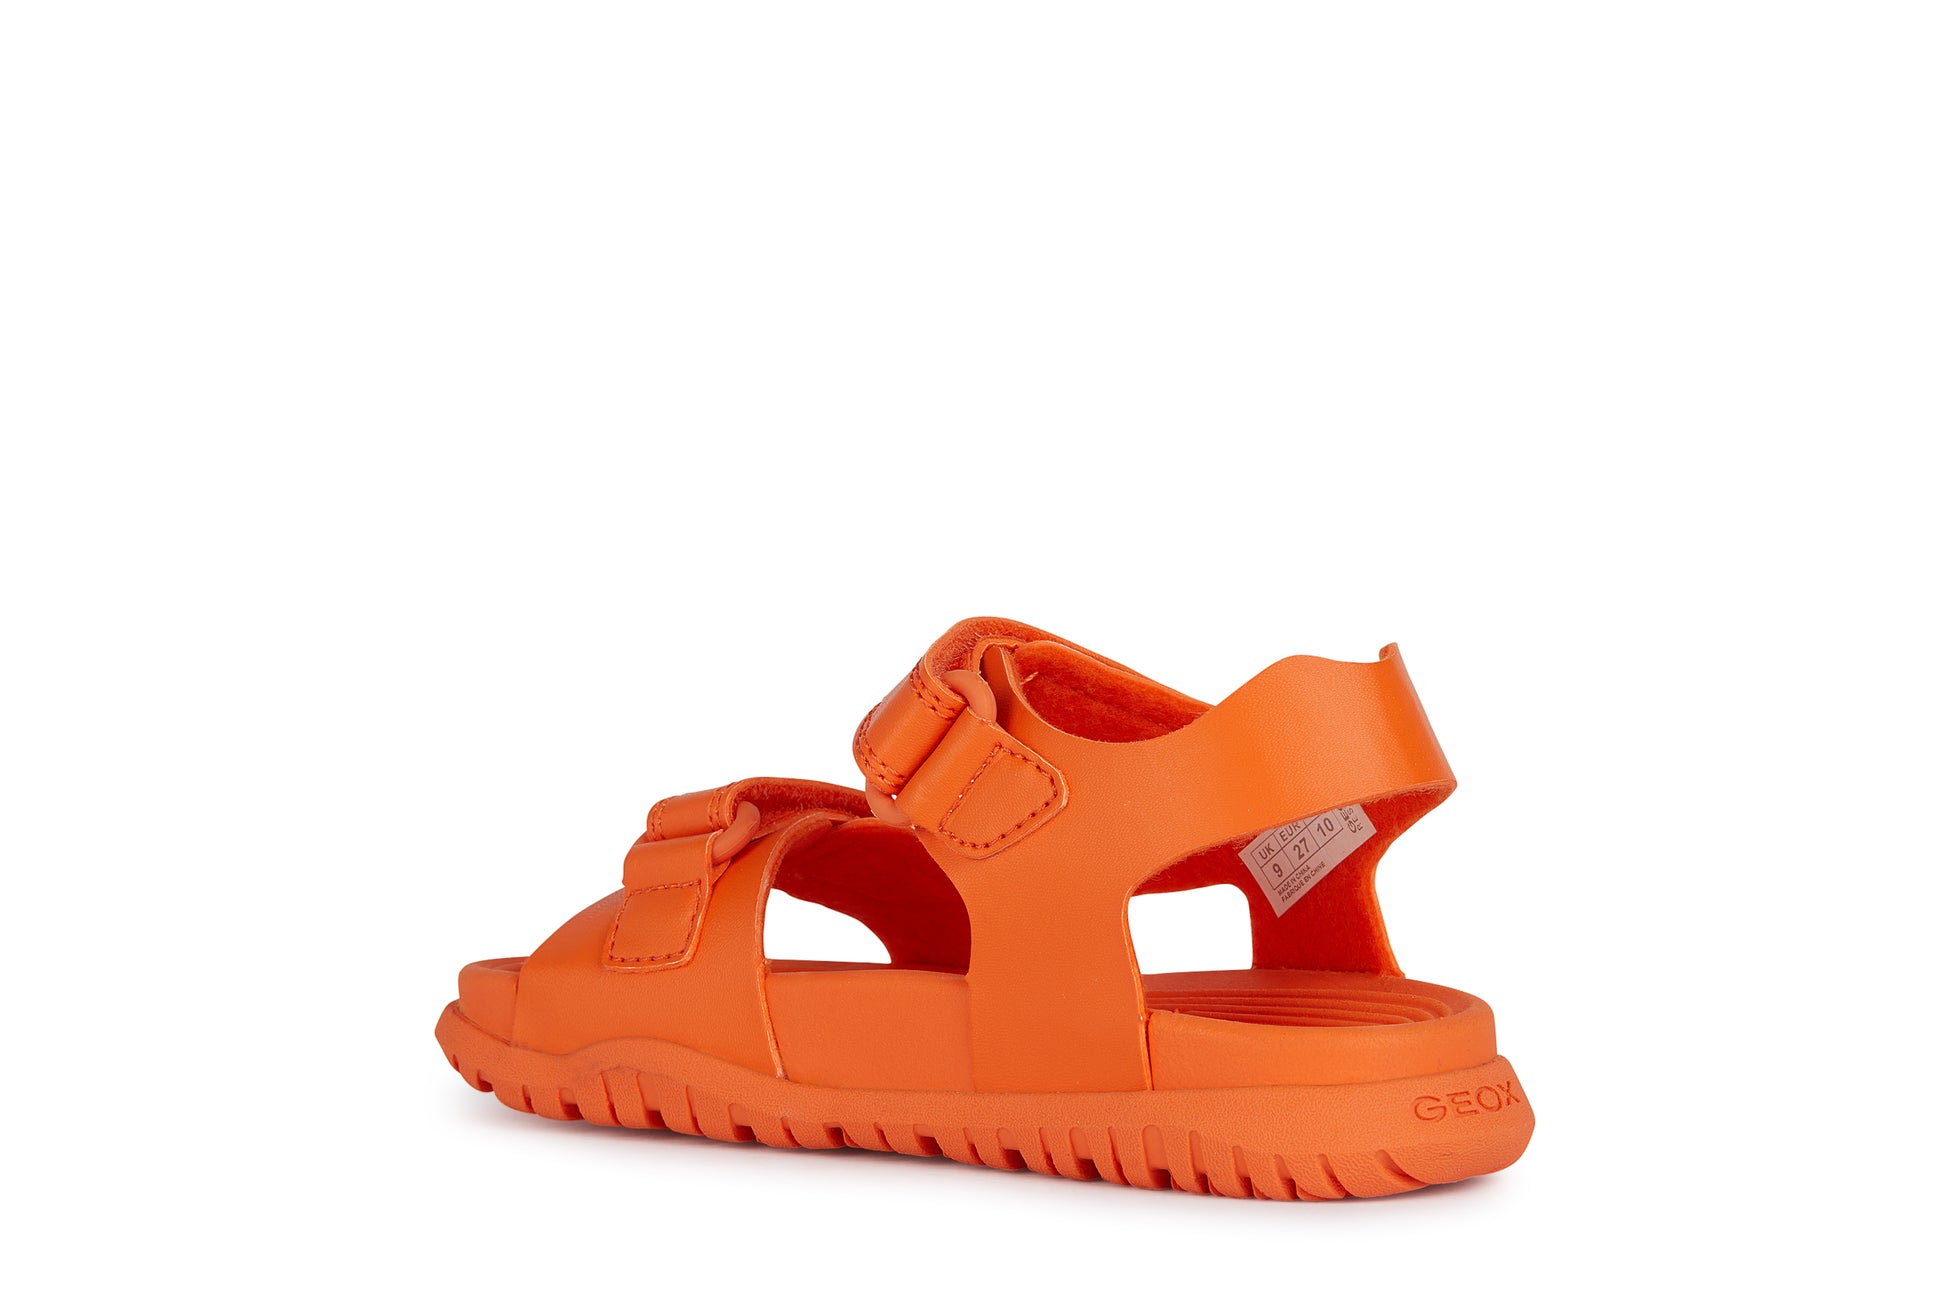 A unisex open toe synthetic water friendly sandal by Geox. Style Fusbetto in orange with two velcro fastenings. Back angled view.